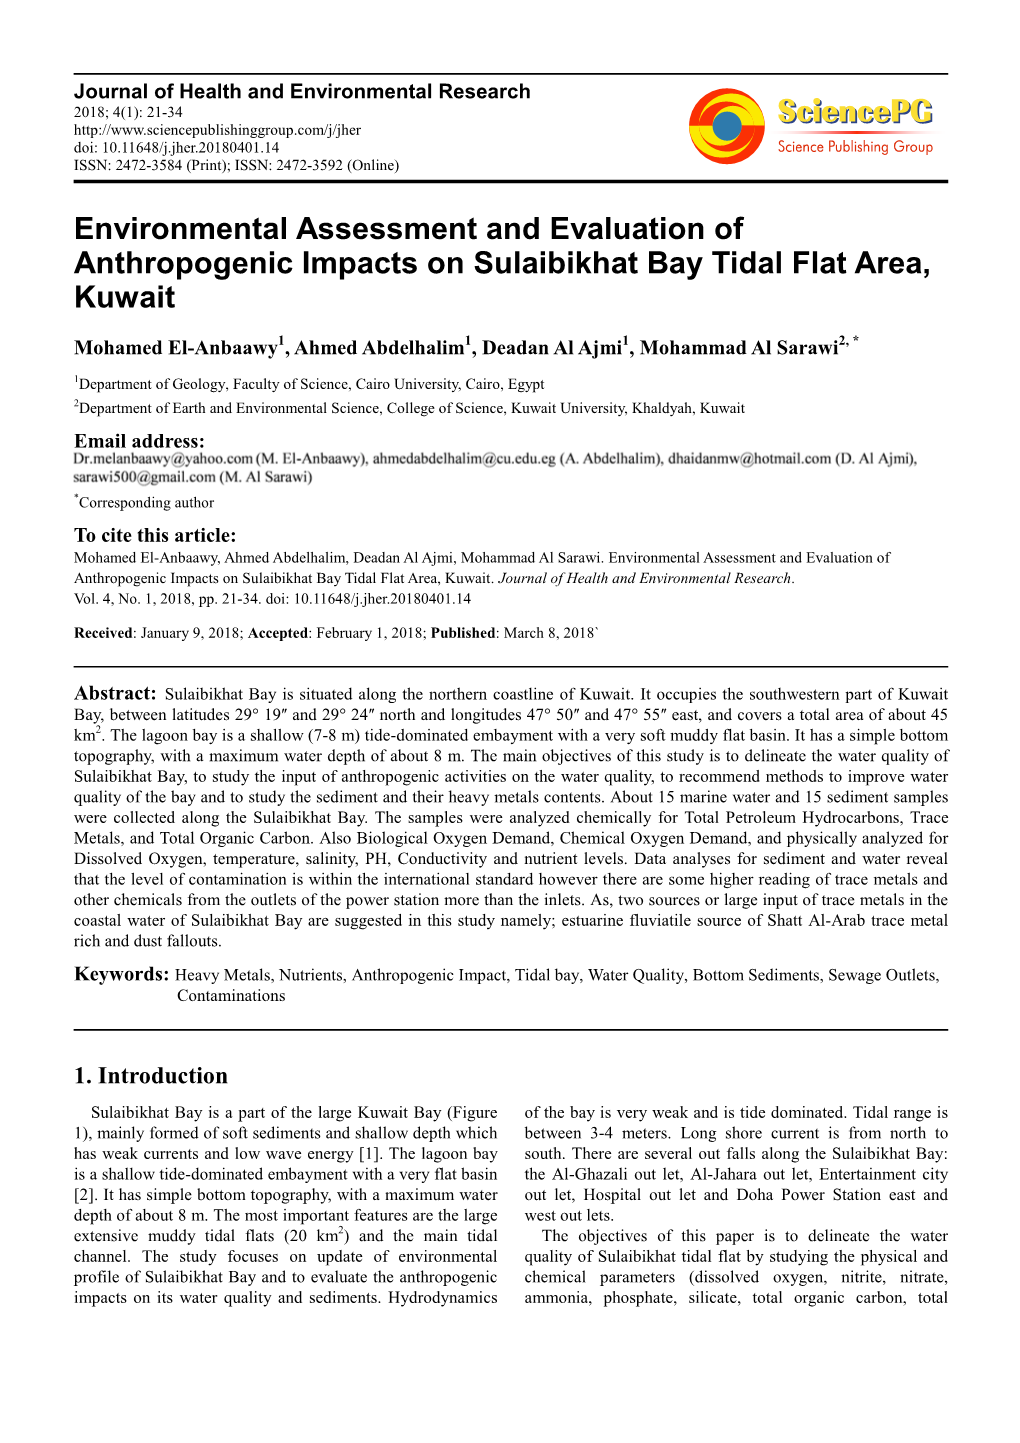 Environmental Assessment and Evaluation of Anthropogenic Impacts on Sulaibikhat Bay Tidal Flat Area, Kuwait